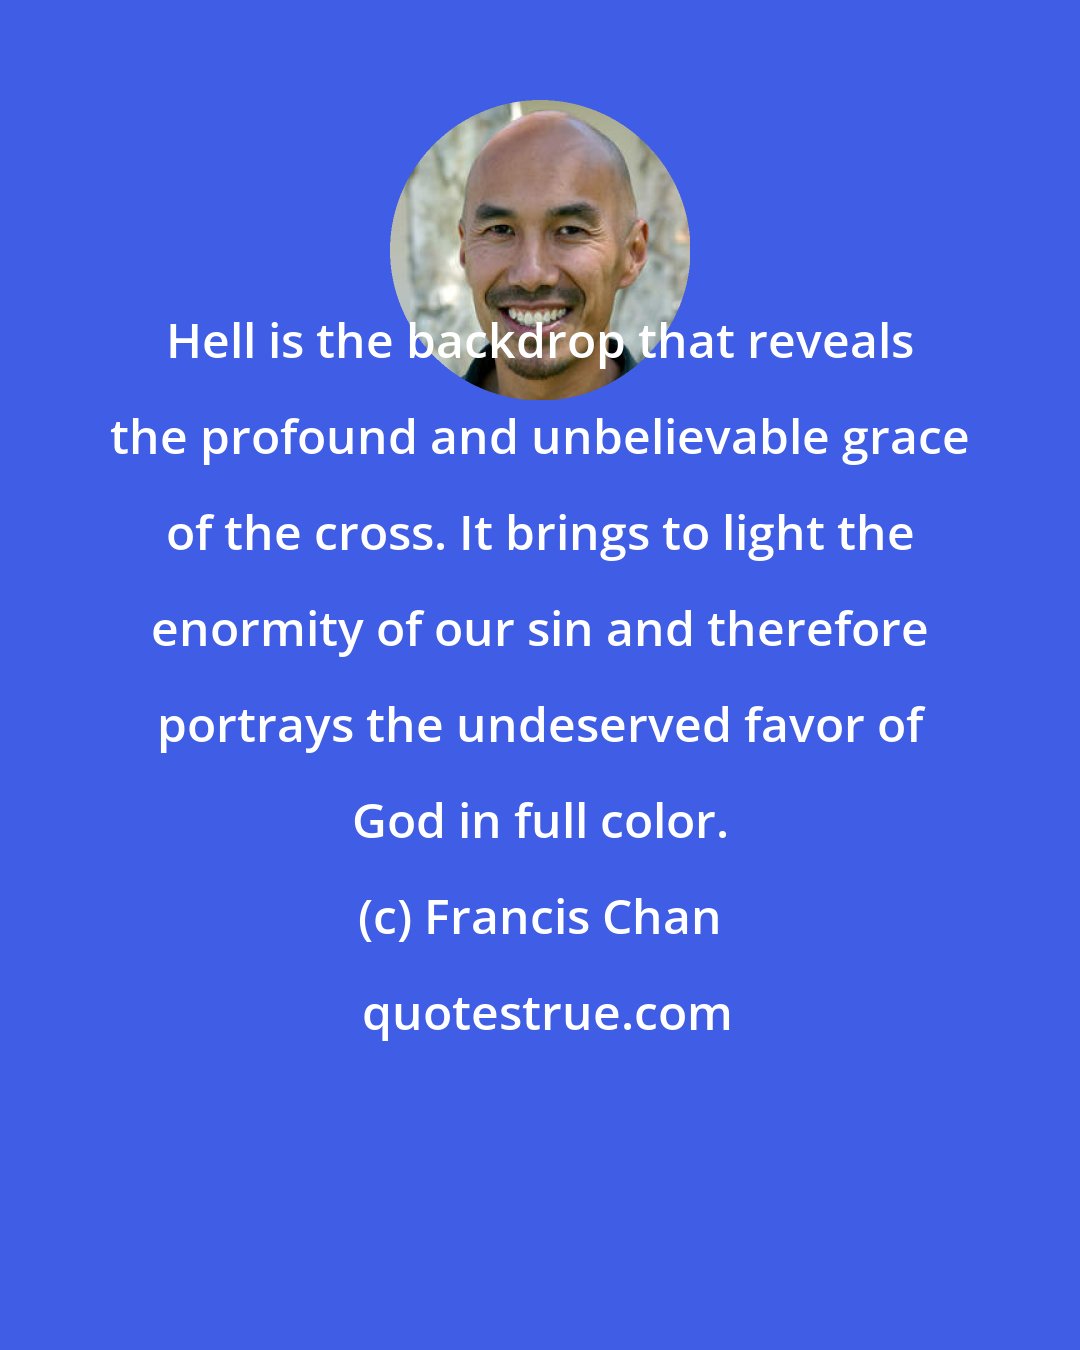 Francis Chan: Hell is the backdrop that reveals the profound and unbelievable grace of the cross. It brings to light the enormity of our sin and therefore portrays the undeserved favor of God in full color.